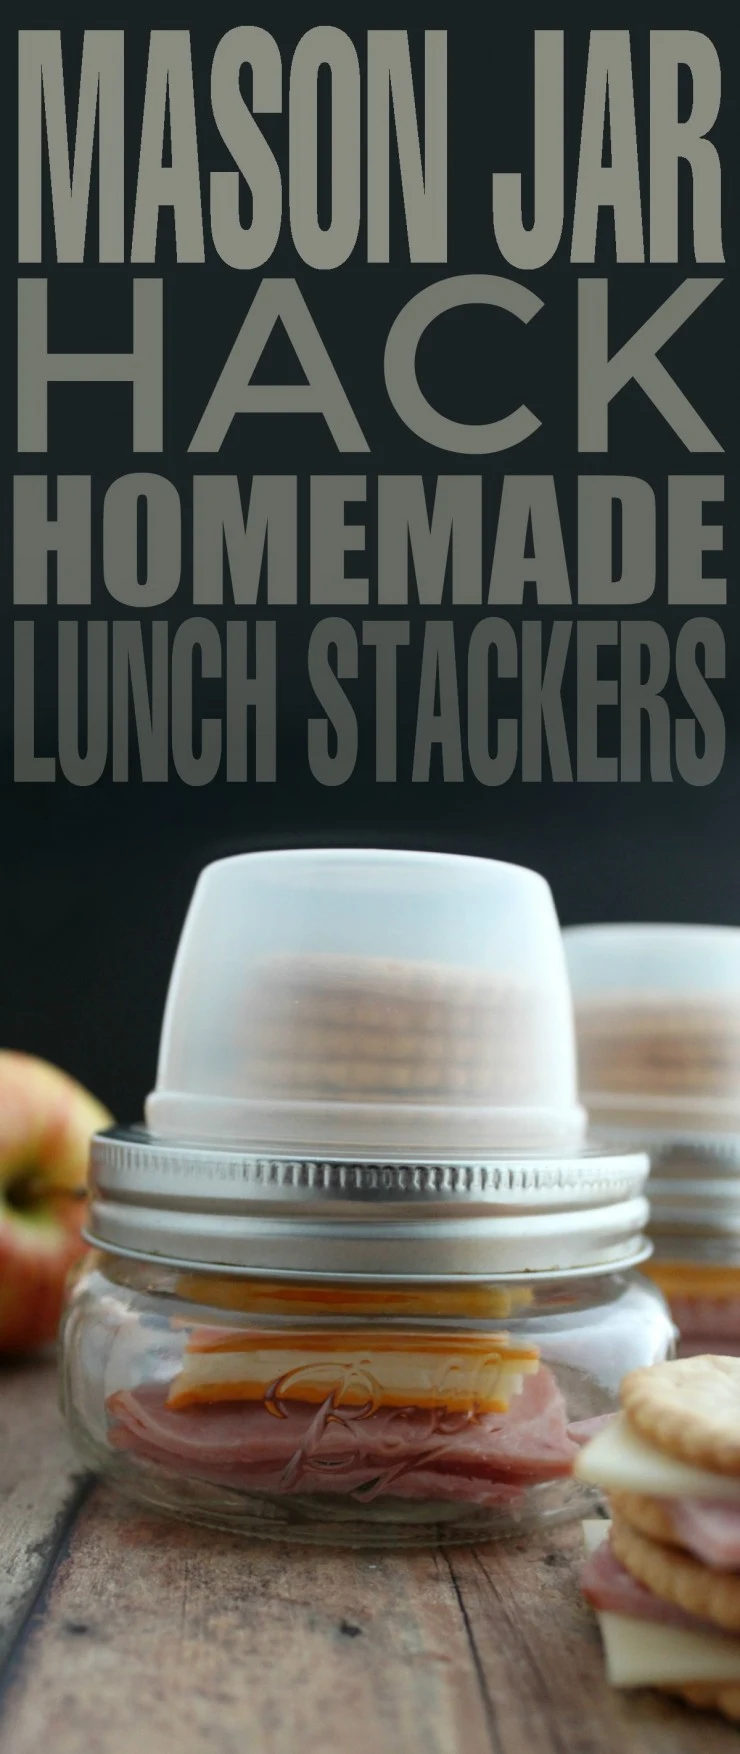 Allow kids to enjoy lunch stackables that are healthier + much more affordable (include nitrate free meats, gluten free crackers, etc.). Also, a great way for those with allergies to enjoy lunch stackables – gluten free products, dairy free sliced cheese, etc.